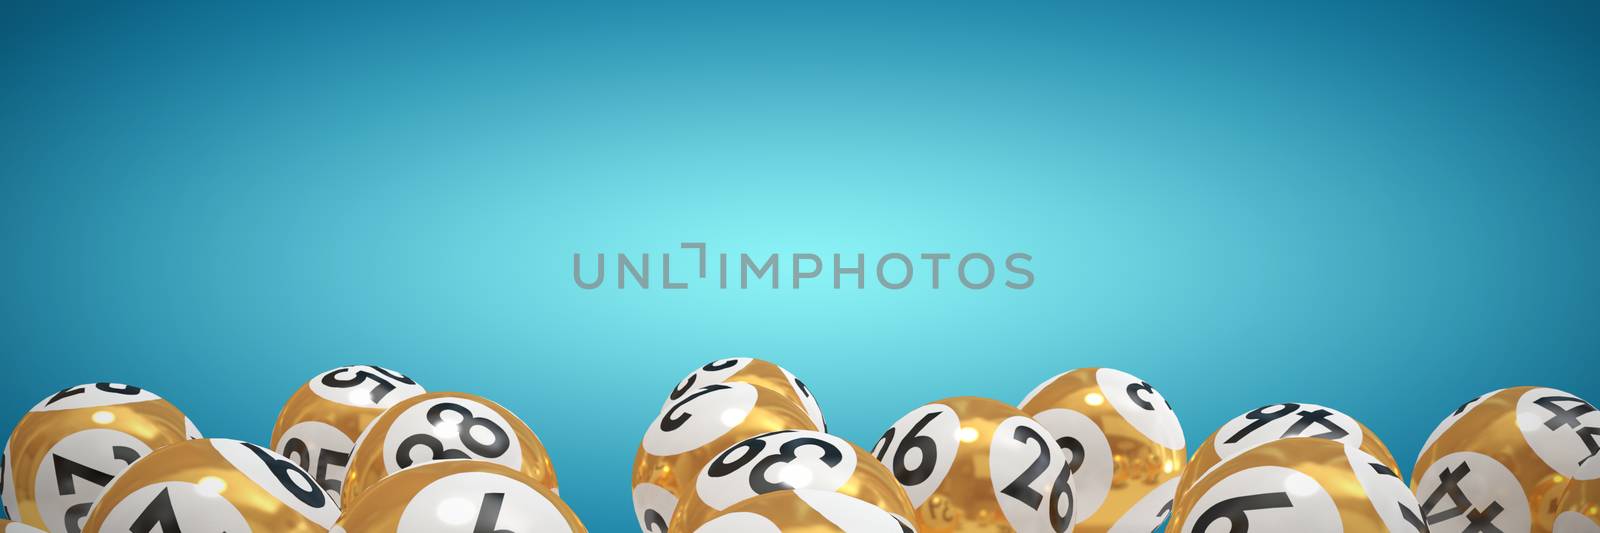 Lottery balls with nimbers against abstract blue background